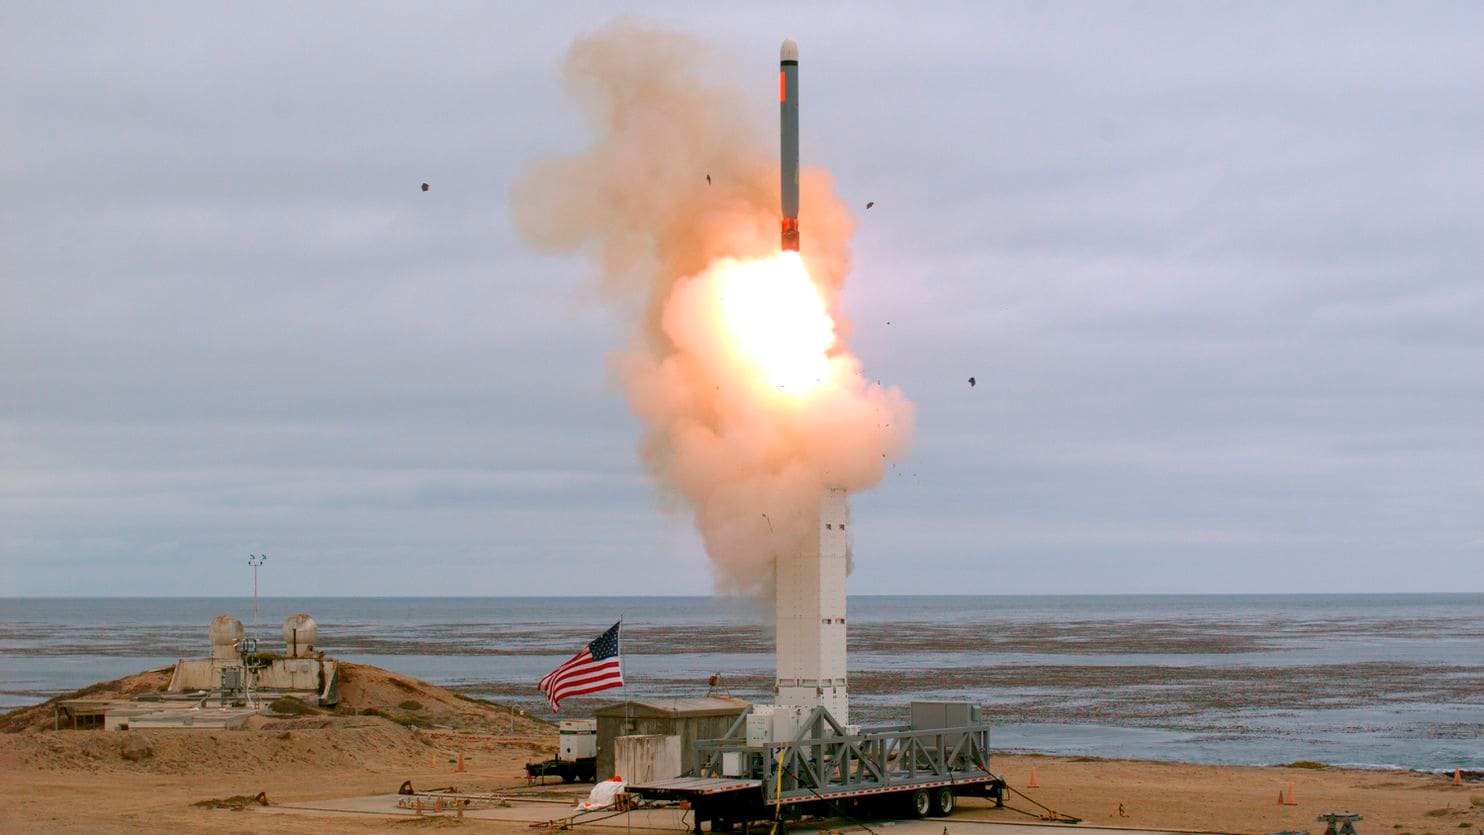 U.S. tests first intermediate-range missile since withdrawing from treaty with Russia A cruise missile launches off the coast of California on Aug. 18. (Scott Howe/Department of Defense/AP)